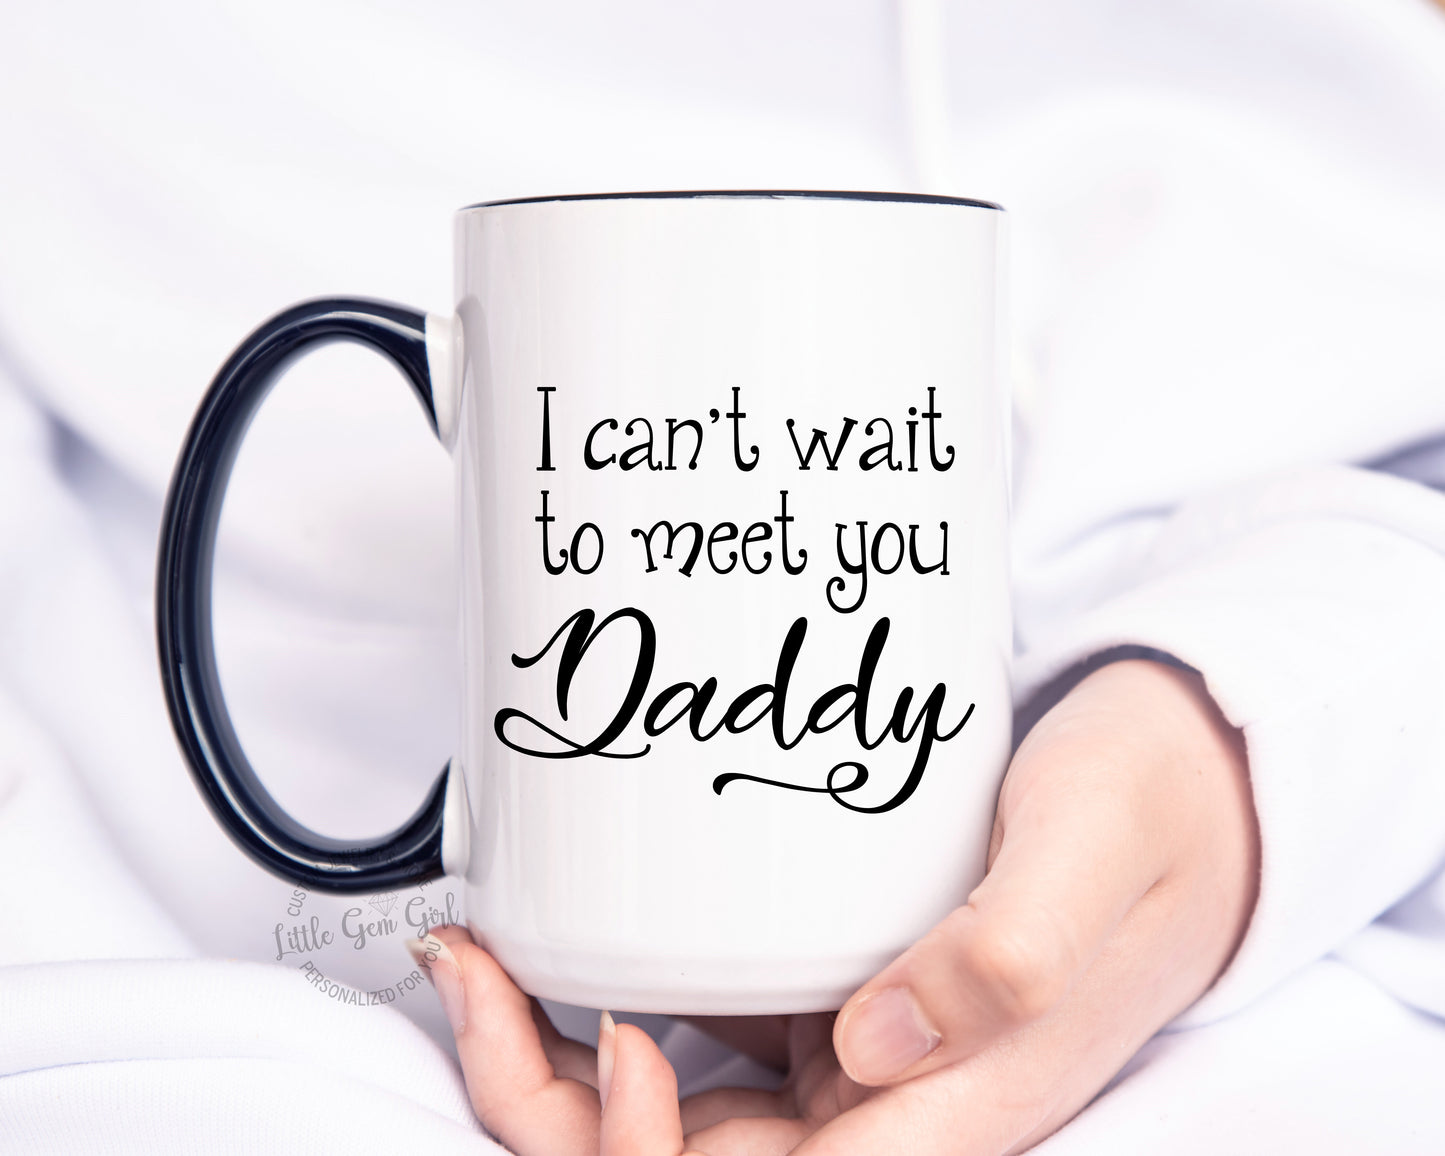 Custom Coffee Mug Personalized with Your Ultrasound Picture - I cant wait to meet you Daddy - Large 15 oz White or Black Cup